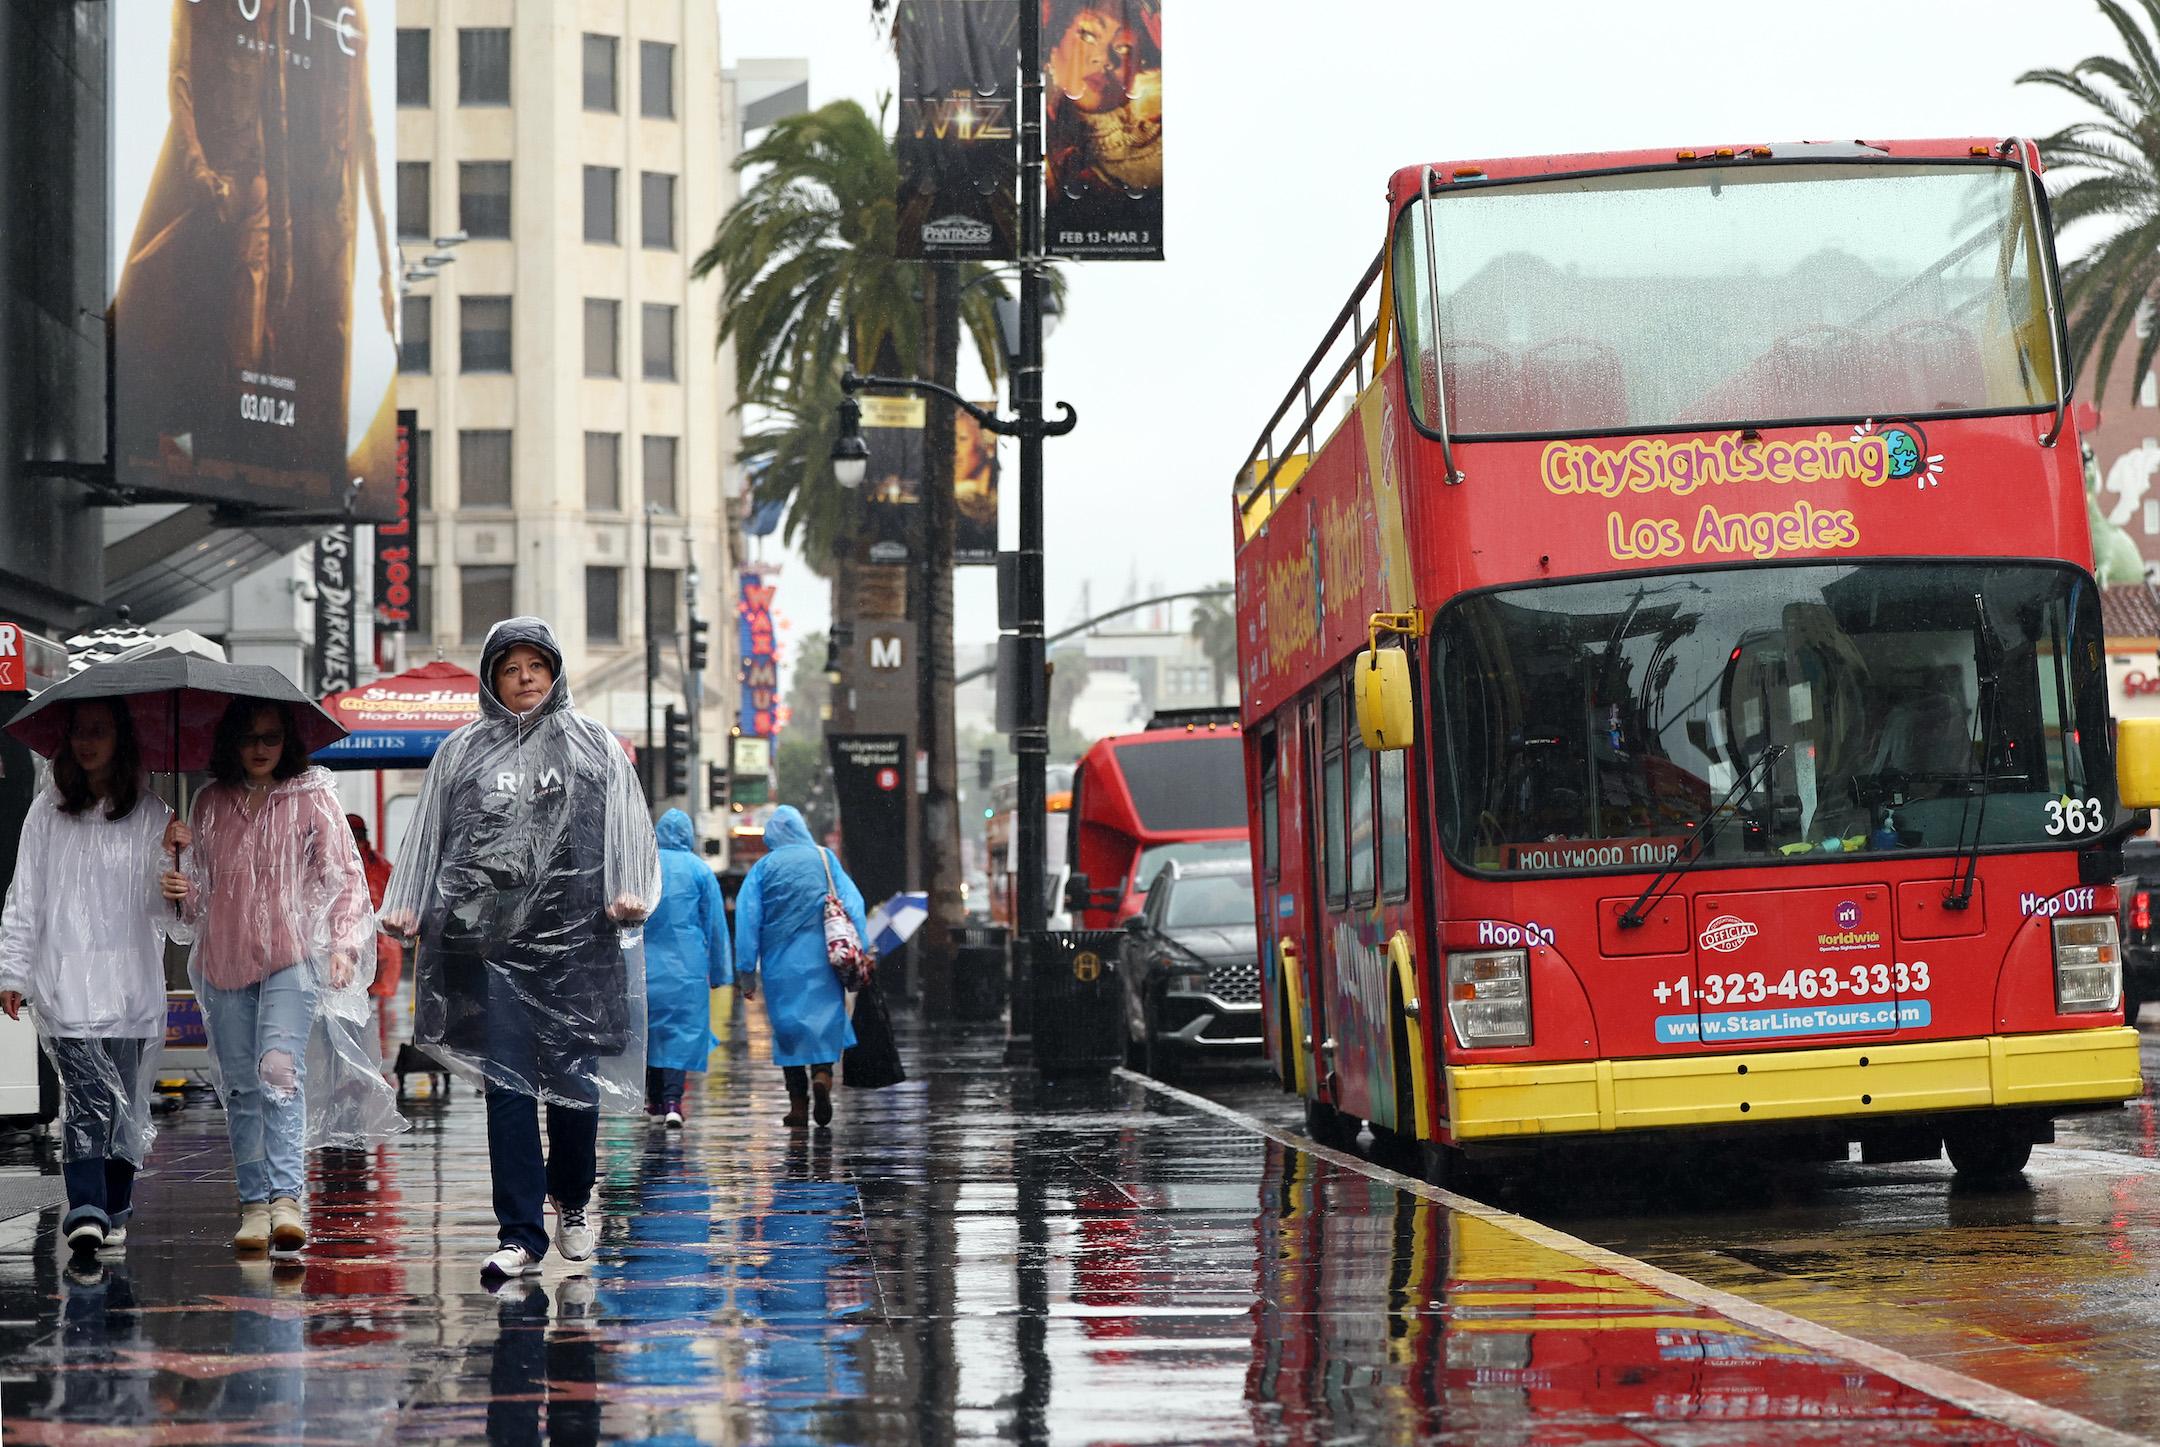 Cold Front Will Bring Rain, Snow, High Winds to Southern California